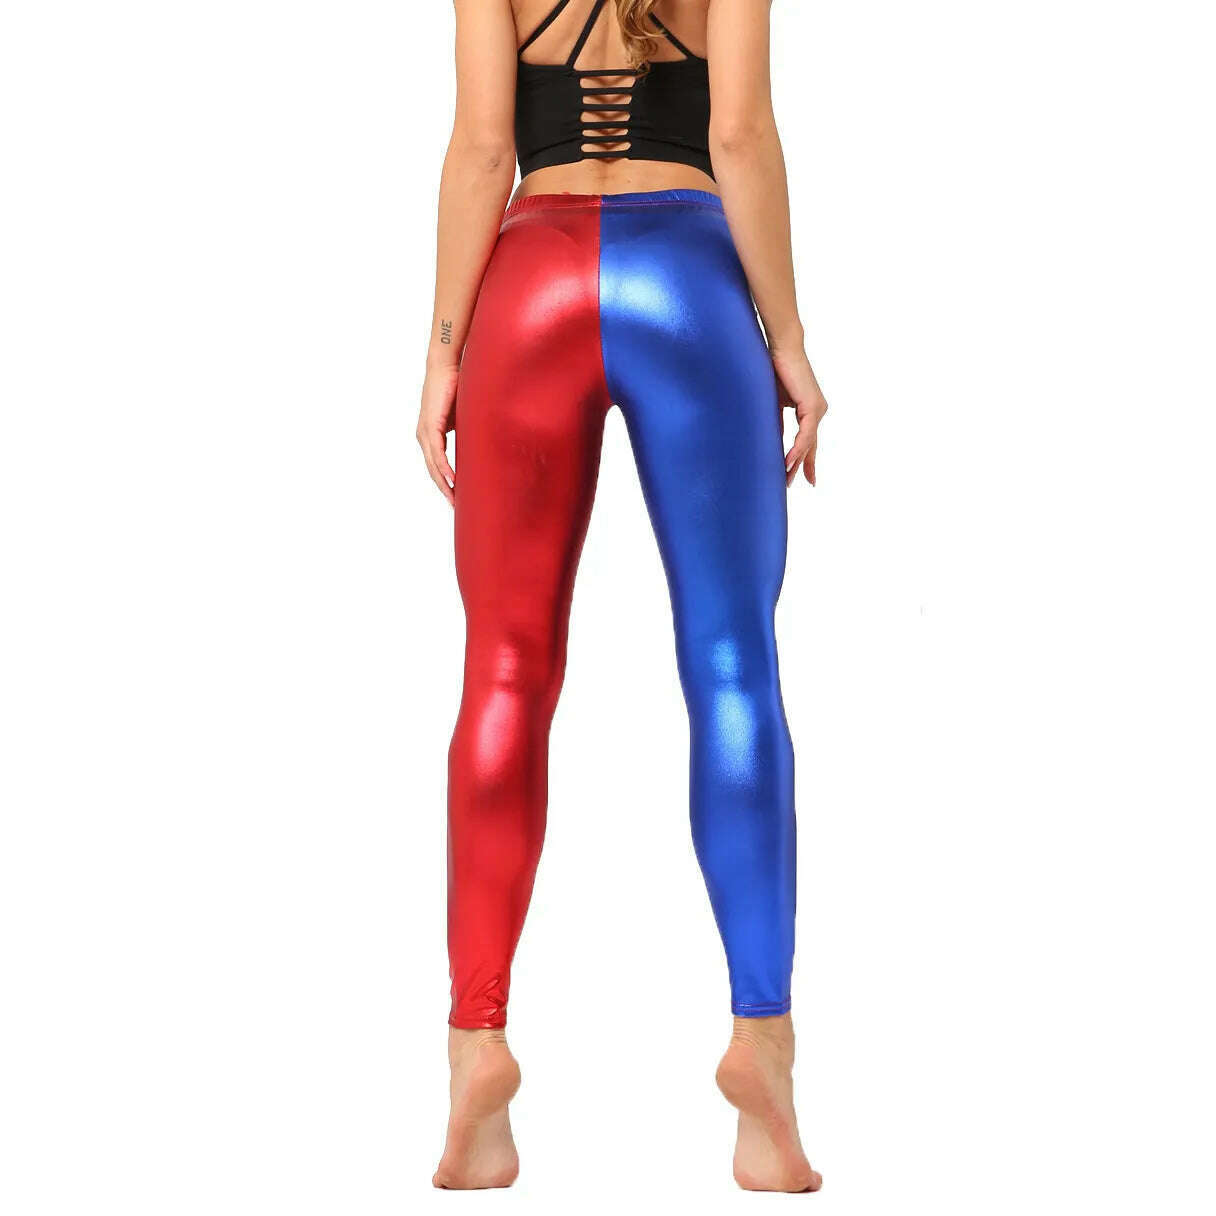 KIMLUD, Metallic Color PU Leggings Women Faux Leather Pants Dancing Party Pant Sexy Night Club Skinny Costume Pants Tight Trousers, Red blue / One size 50kg below, KIMLUD Women's Clothes